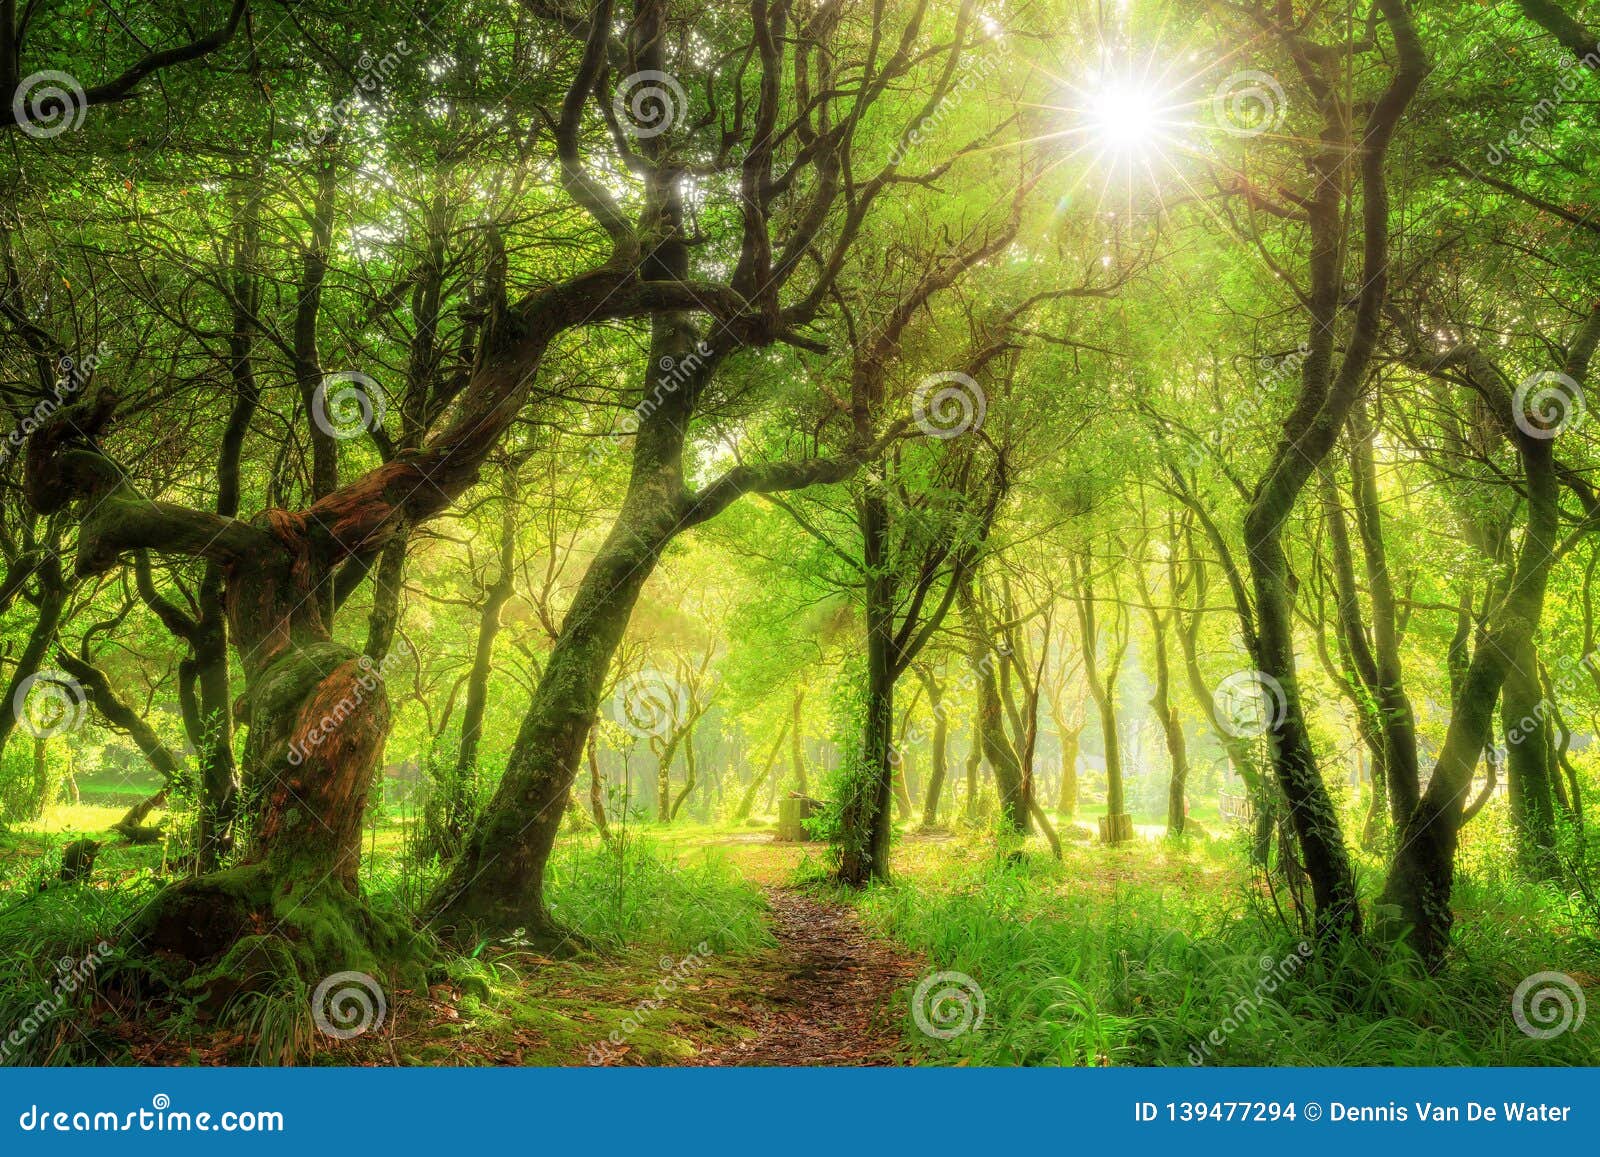 Laurissilva forest Madeira stock photo. Image of island -